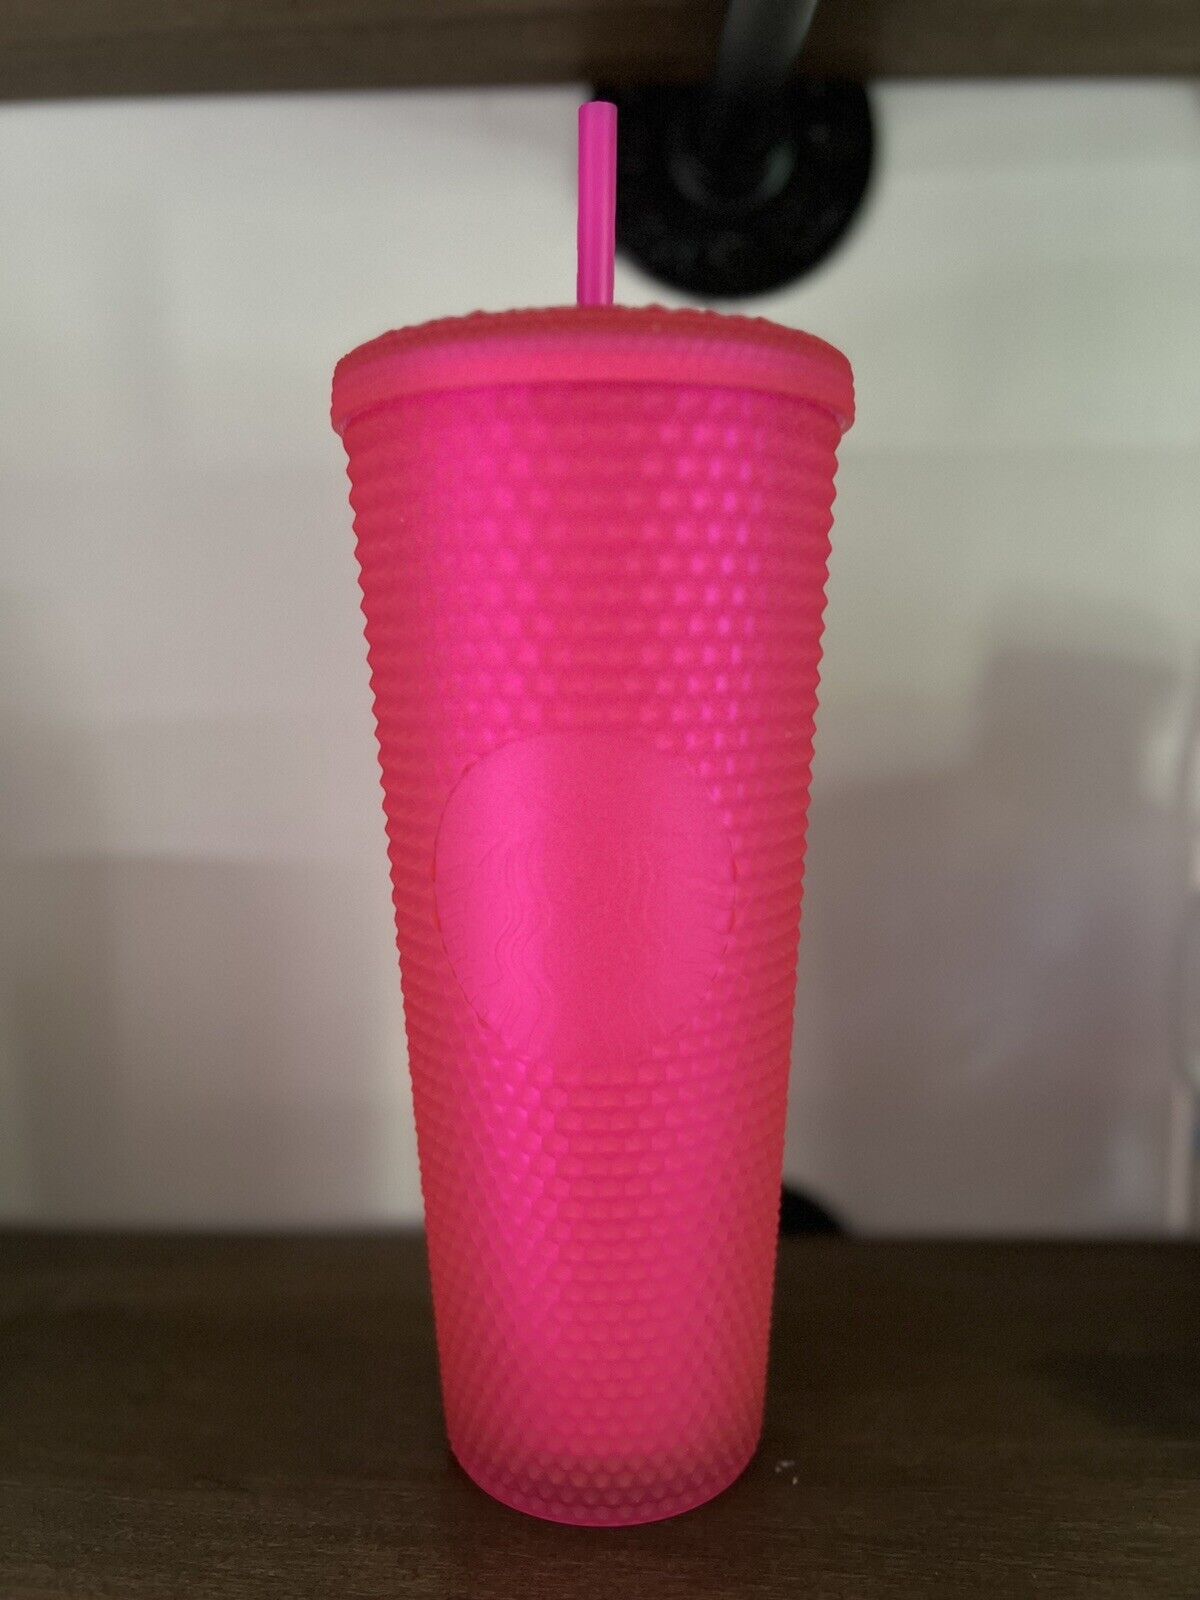 Starbucks Studded Tumbler 24 Oz with Straw - Pink Jelly